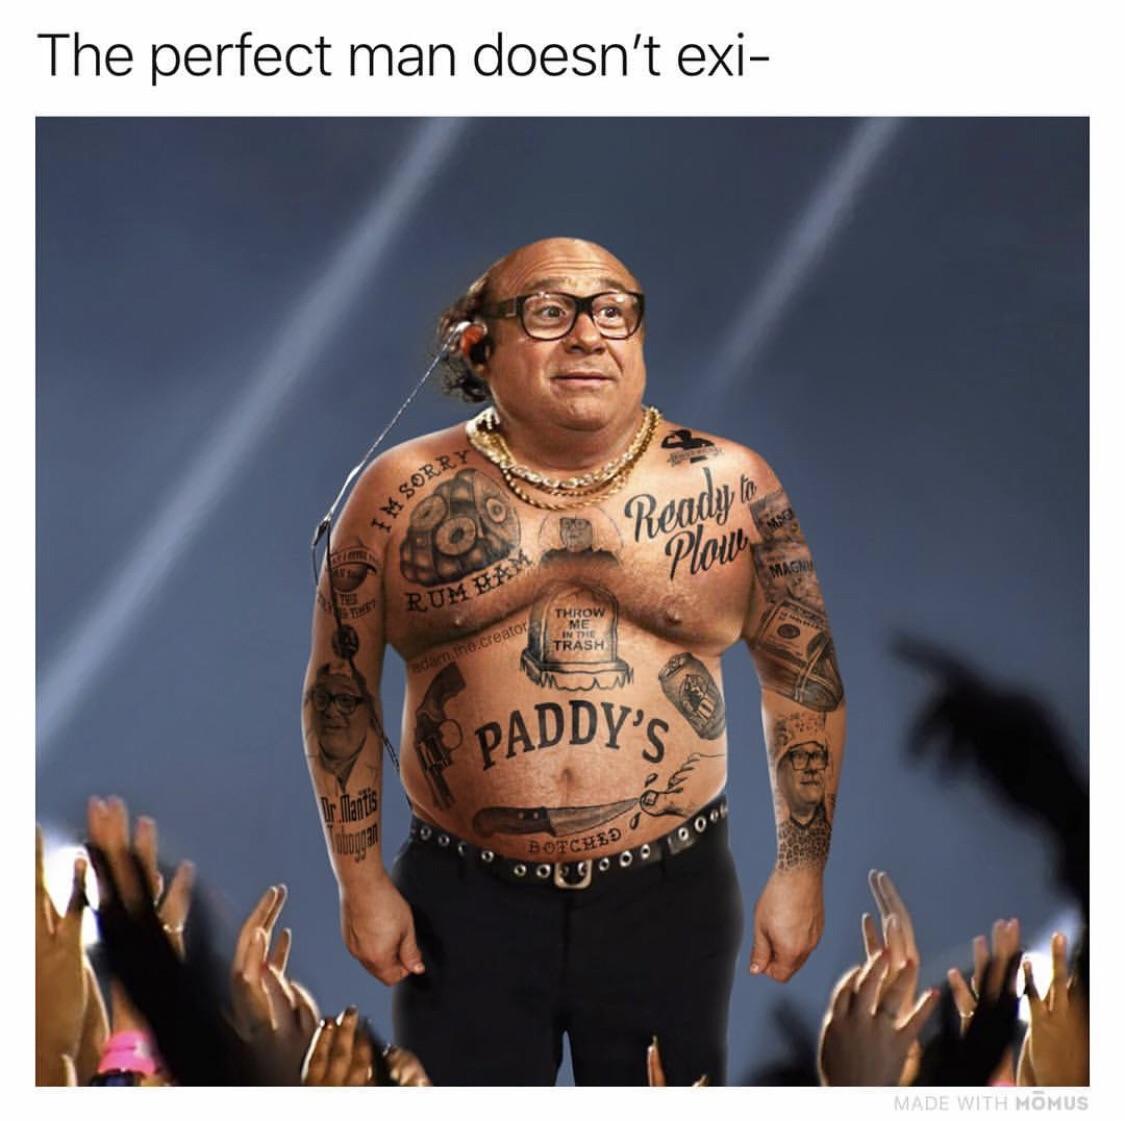 memes - danny devito The perfect man doesn't exi Sorry Ready to Rum Ham Throw Me In Die Trash china.creator The Paddy'S 1BOTCH og Ooo 100 Made With Momus